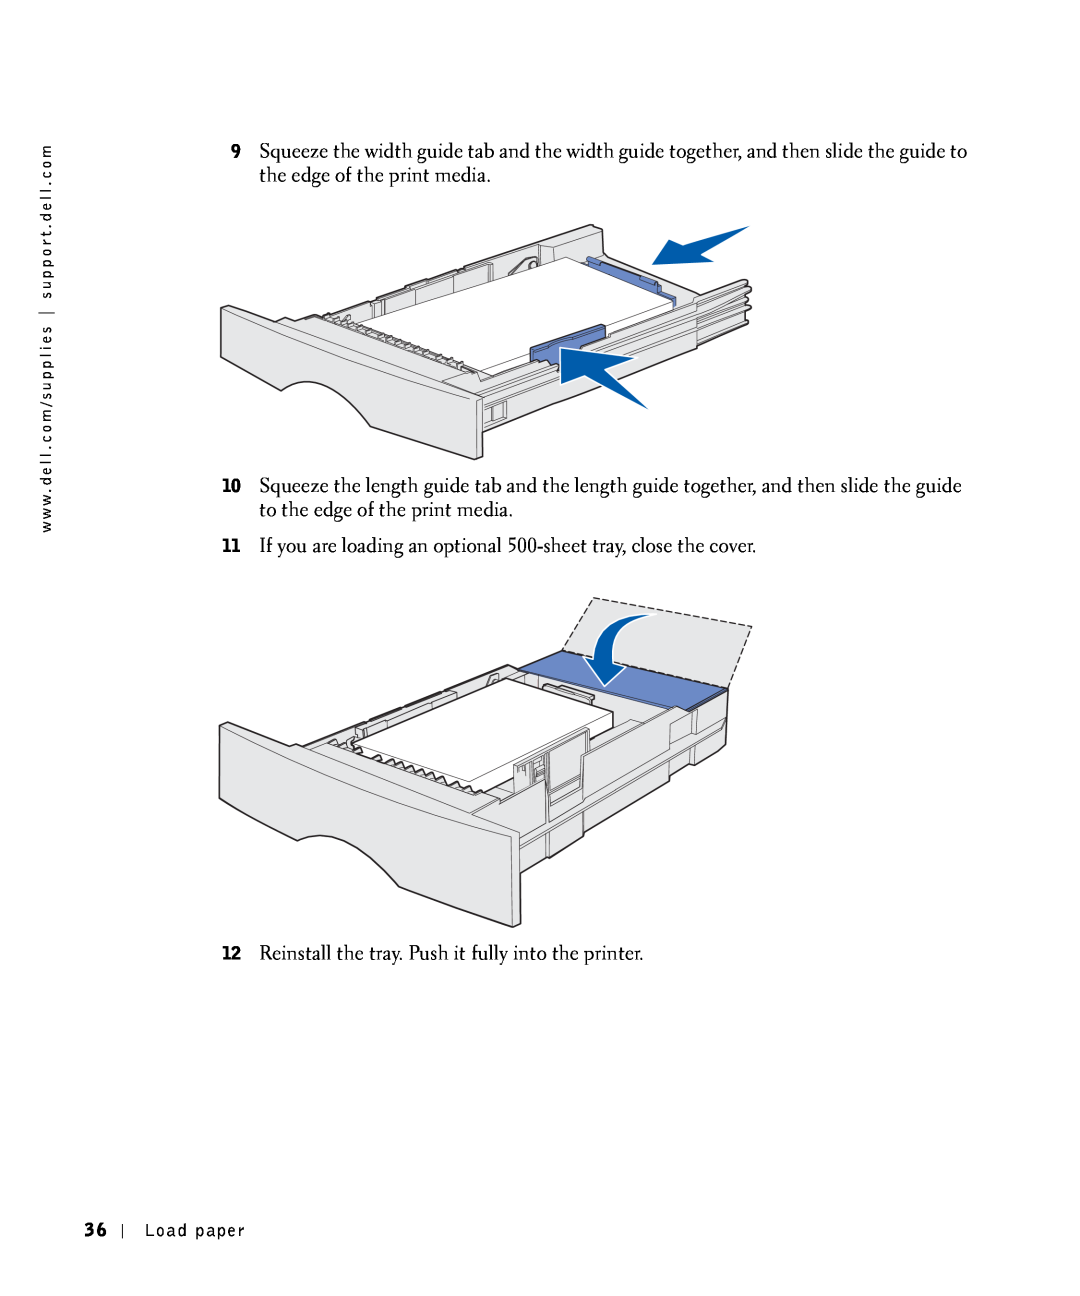 Dell S2500 owner manual If you are loading an optional 500-sheet tray, close the cover 